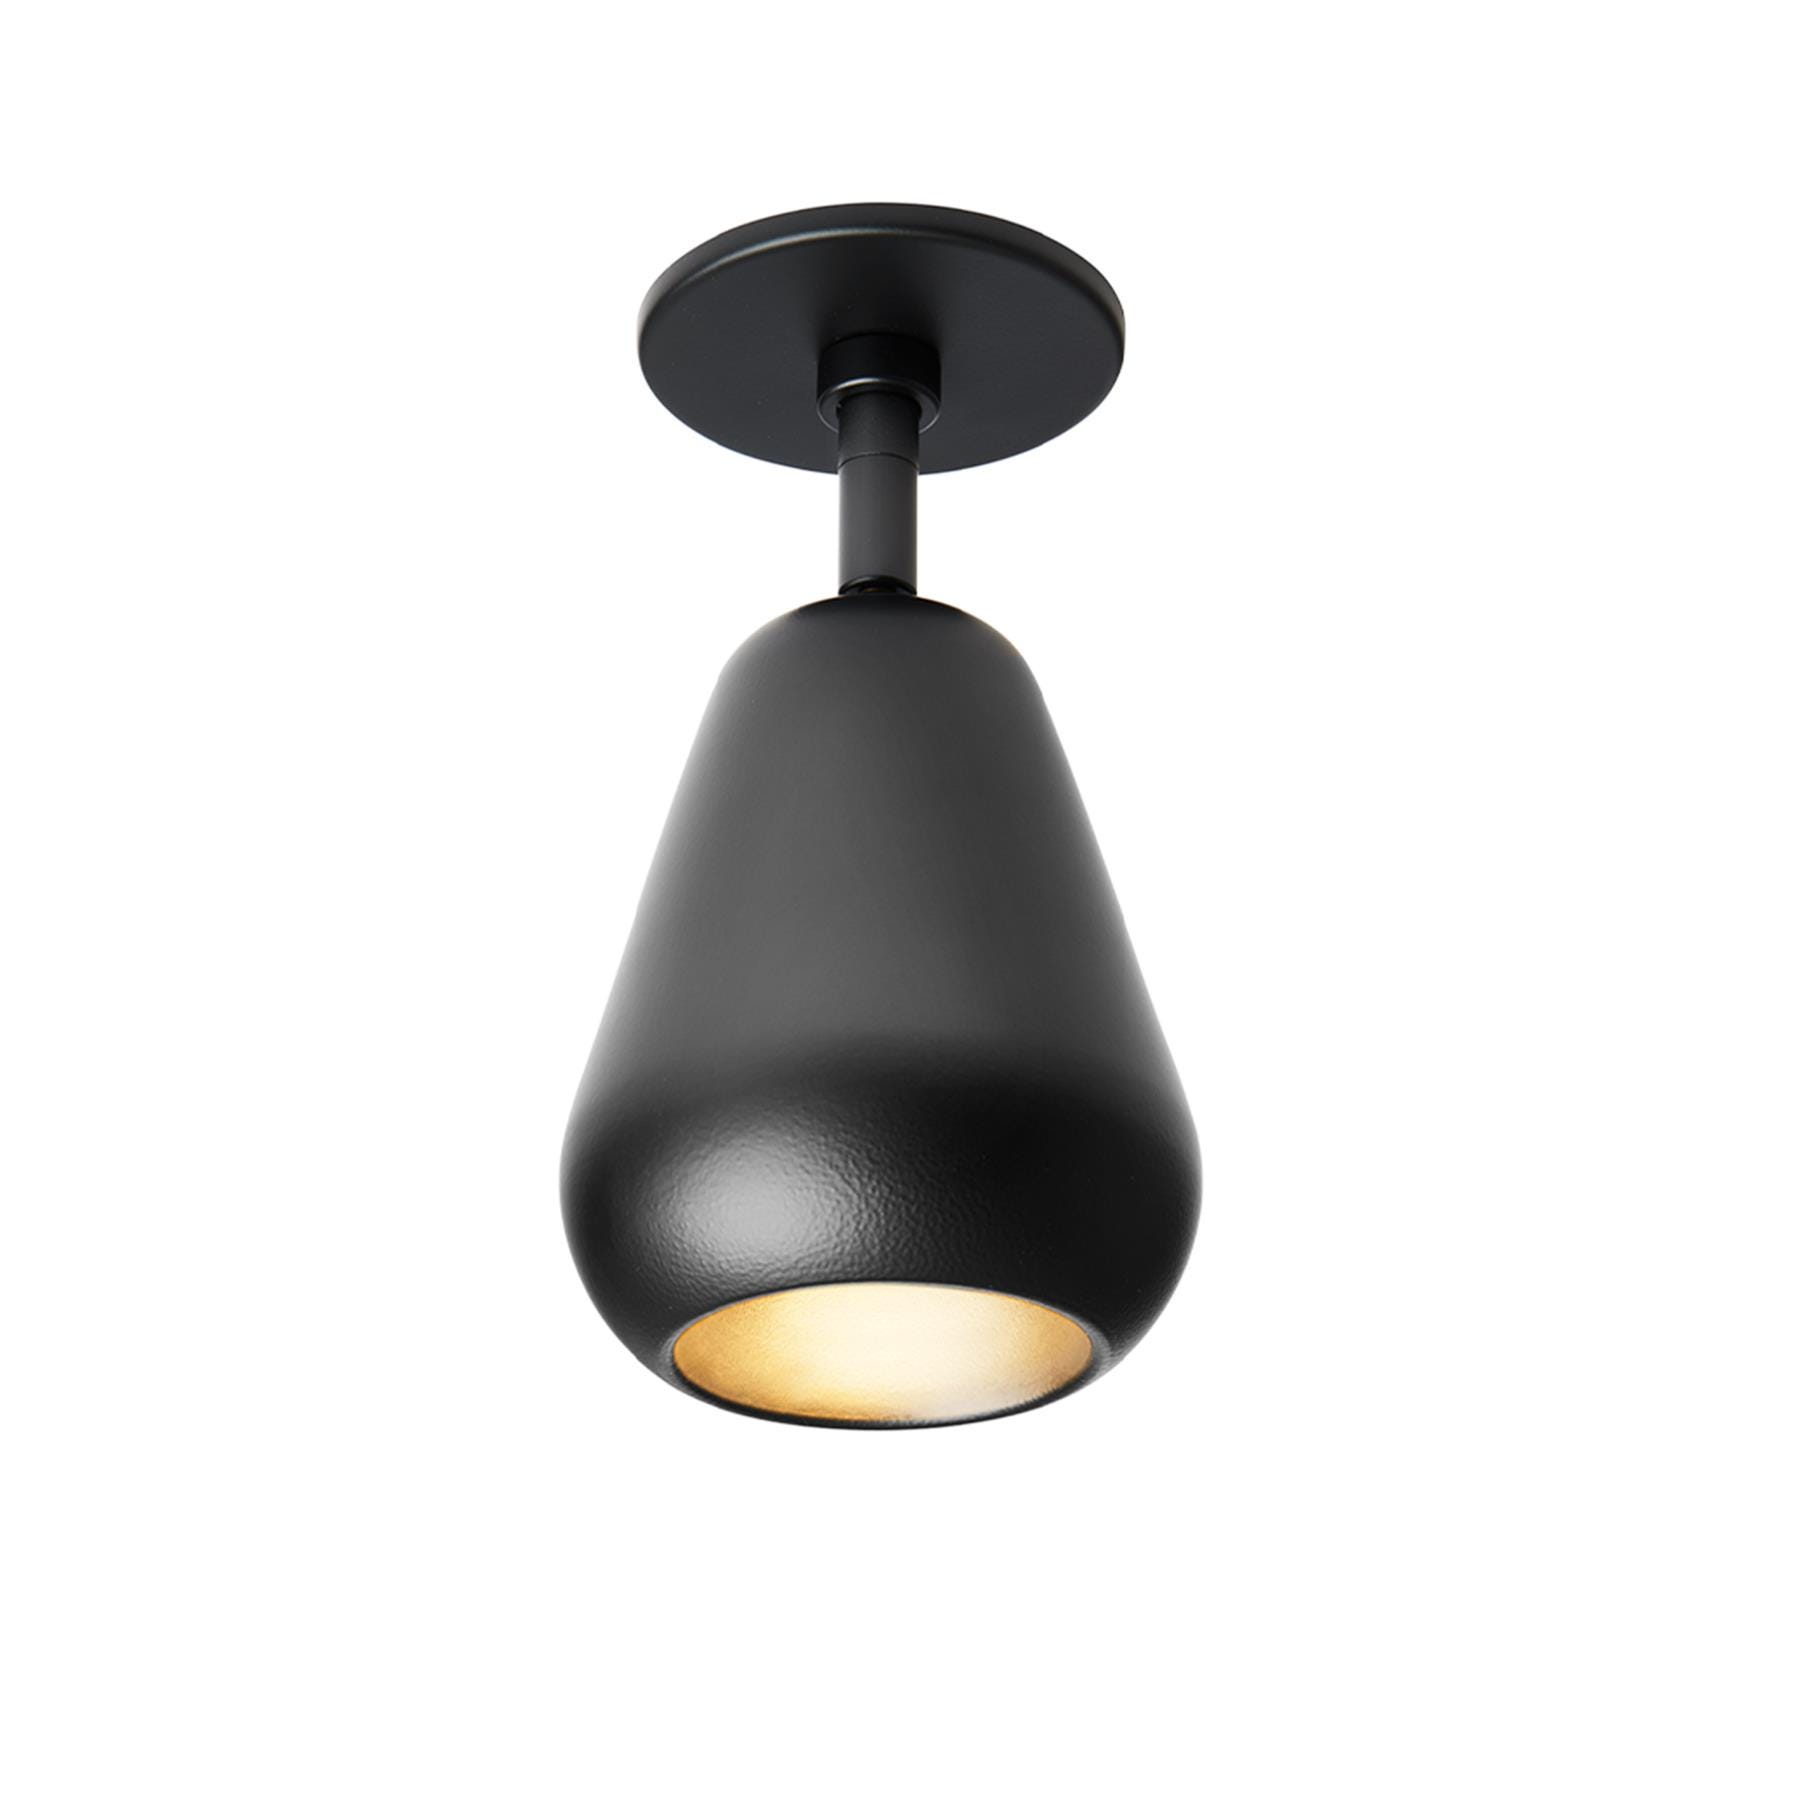 Nuura Anoli Spot Recessed Ceiling Wall Light Black With Adjustable Arm